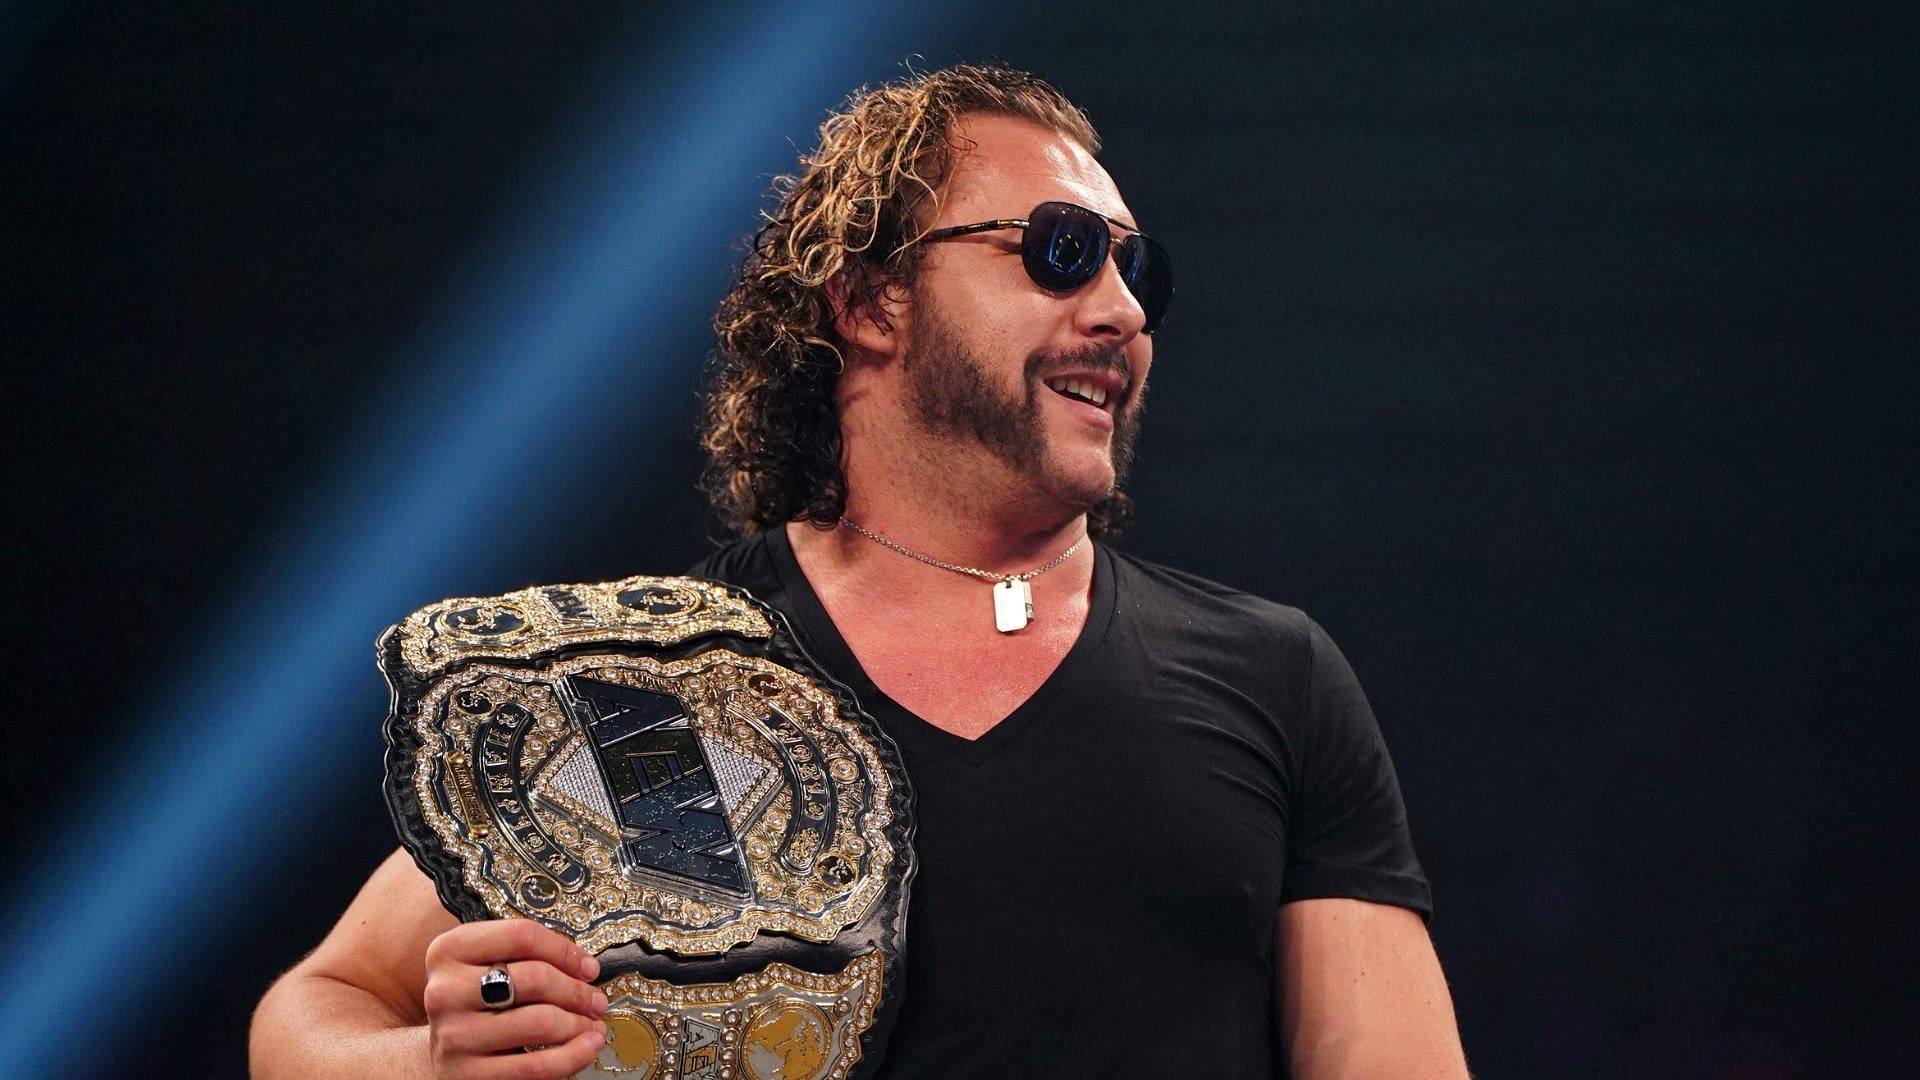 Does Kenny Omega measure up to this WWE legend?